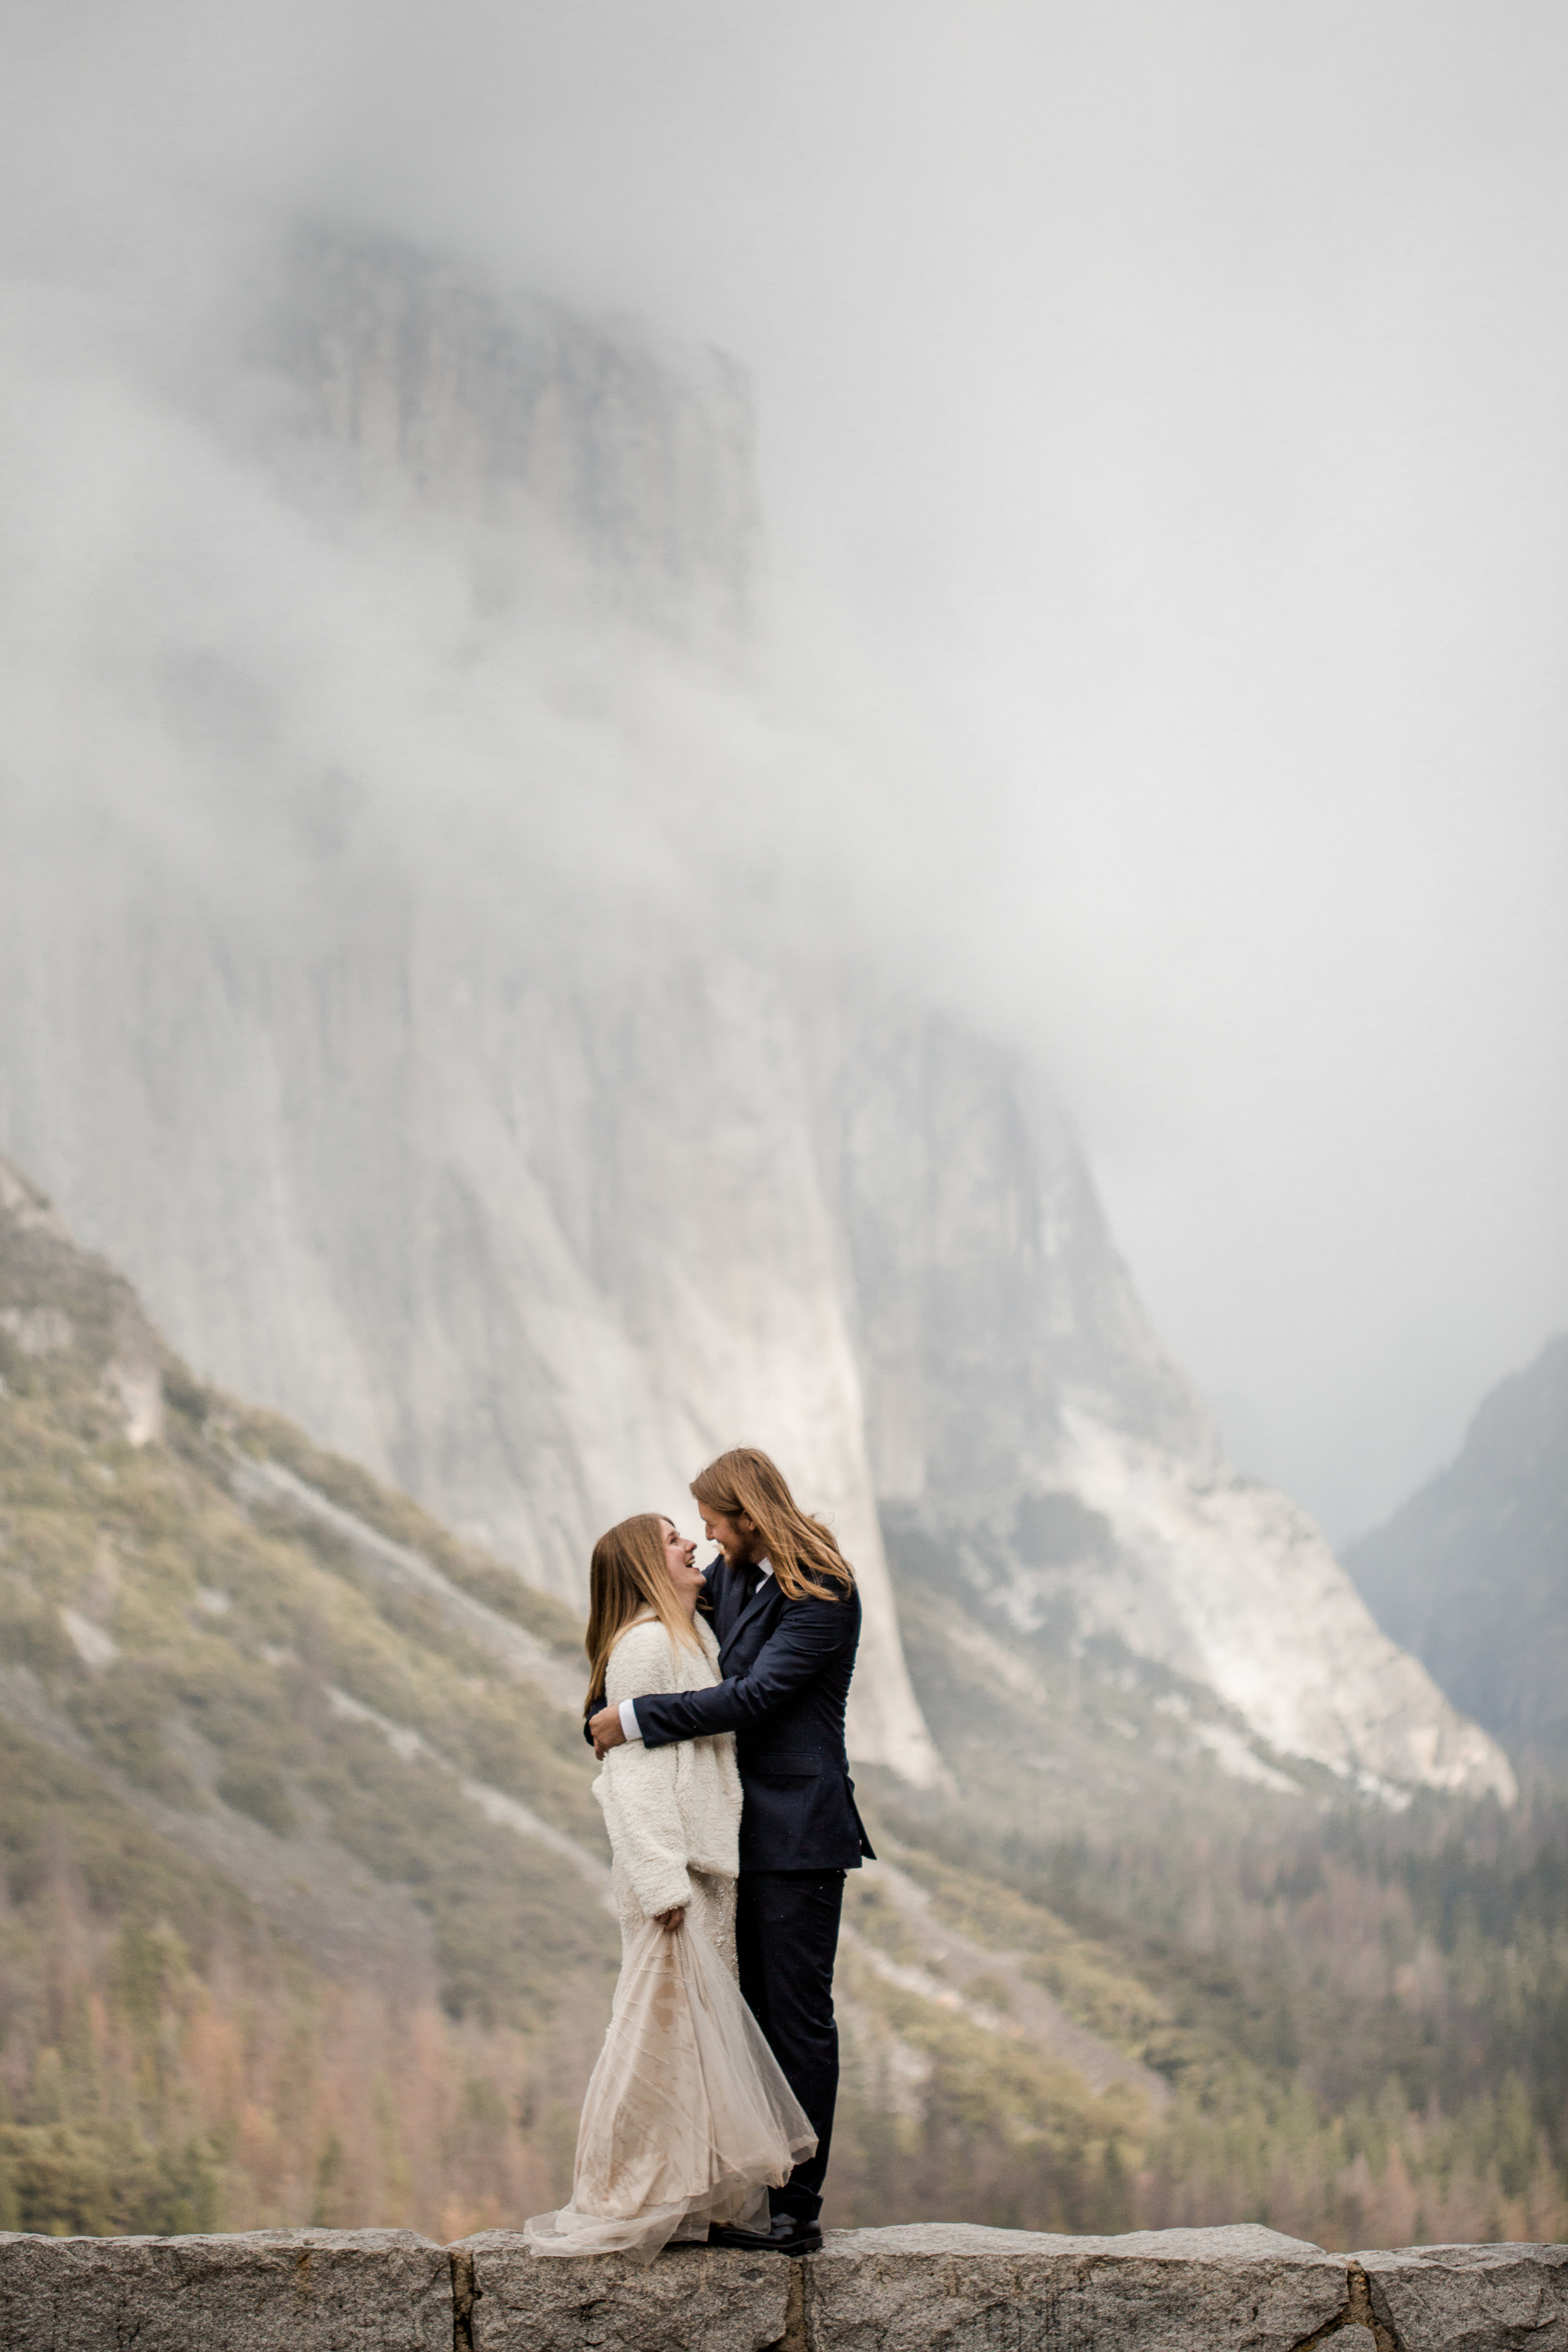 nicole-daacke-photography-yousemite-national-park-elopement-photographer-winter-cloud-moody-elope-inspiration-yosemite-valley-tunnel-view-winter-cloud-fog-weather-wedding-photos-5.jpg